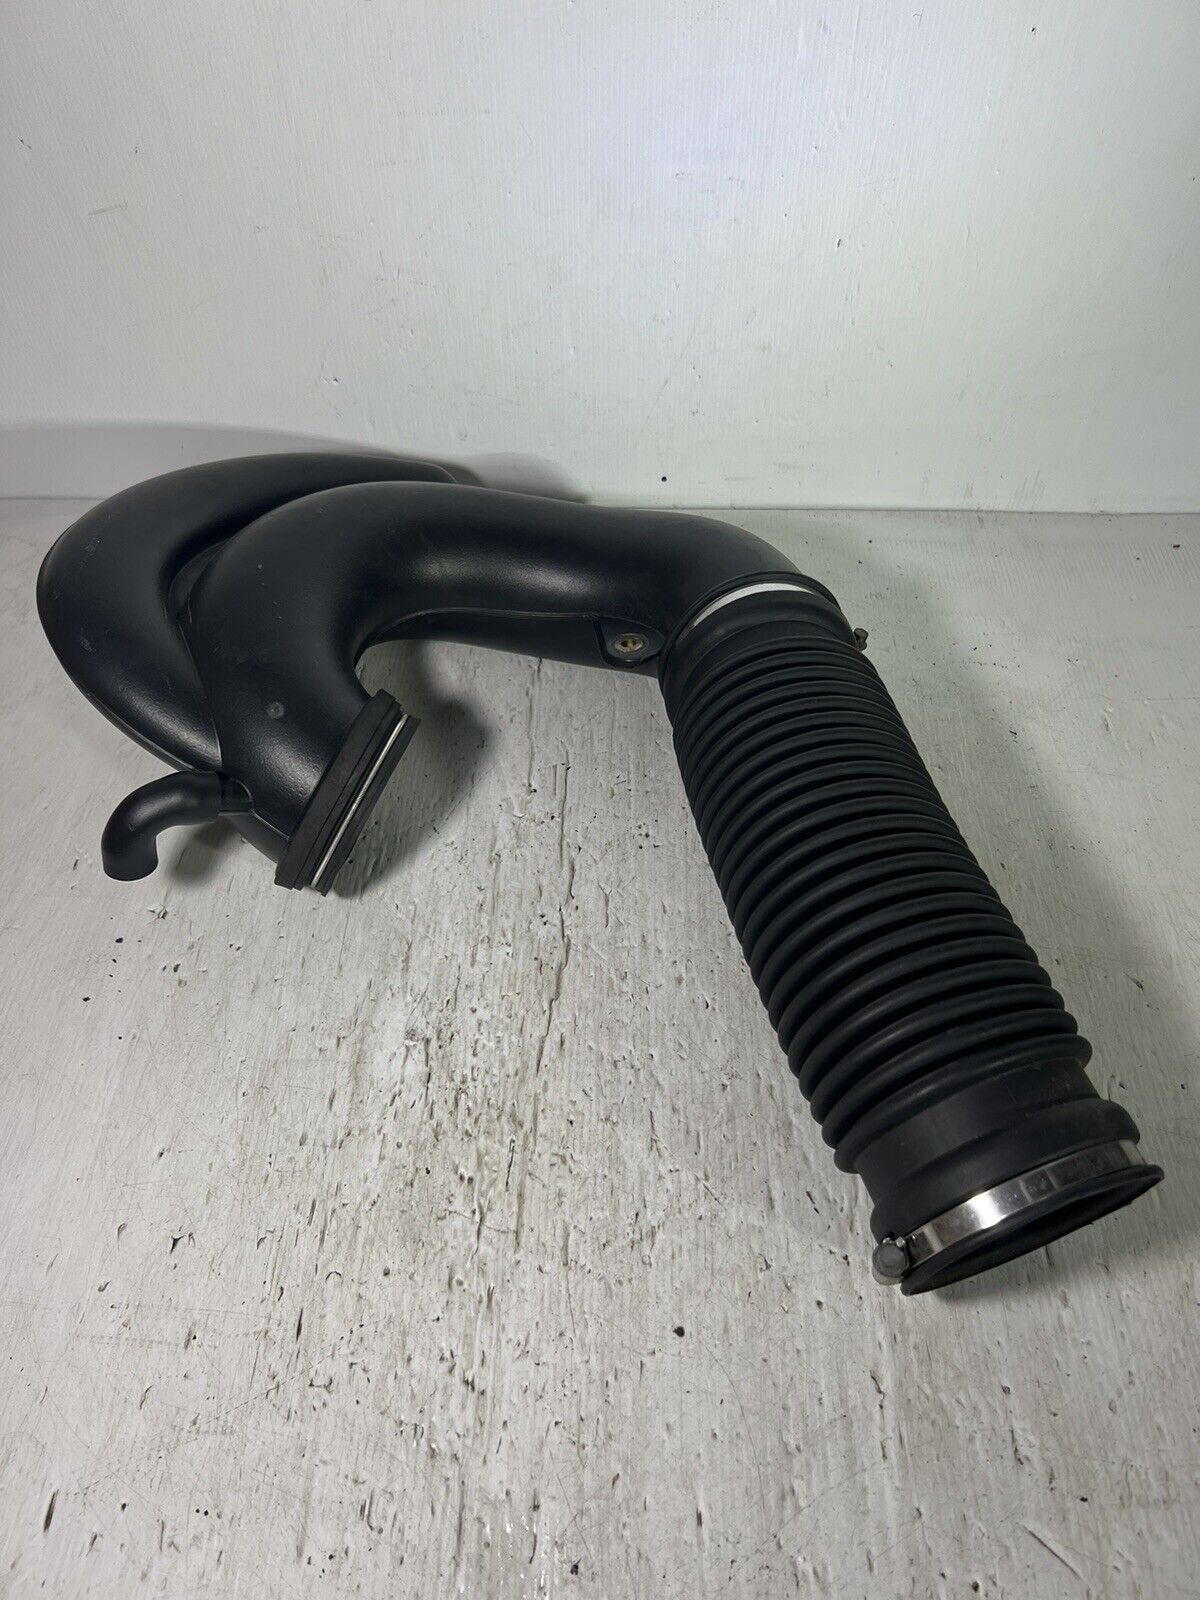 FORD FALCON BA BF TERRITORY SX SY AIR INTAKE PIPE 6 CYLINDER PETROL LPG